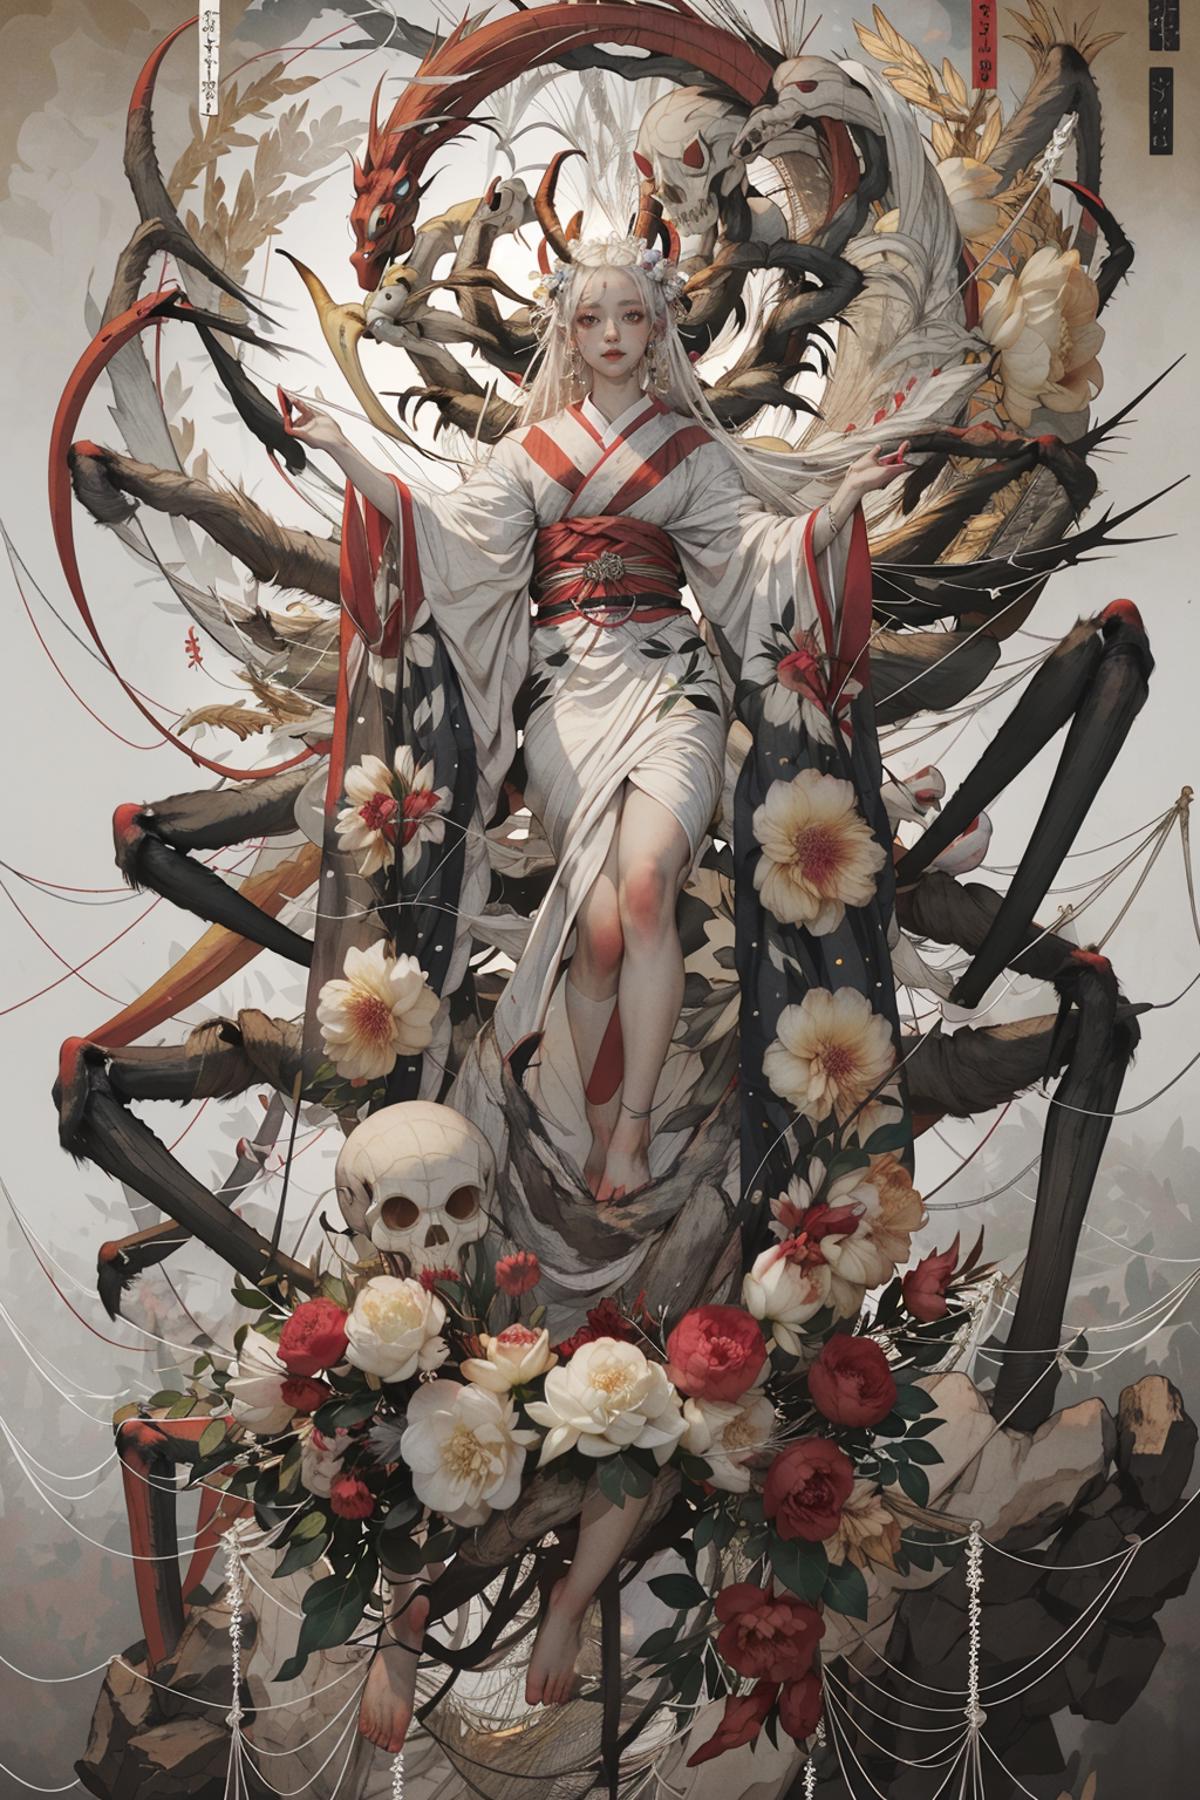 A woman wearing a kimono is sitting on a skull surrounded by red and white flowers.